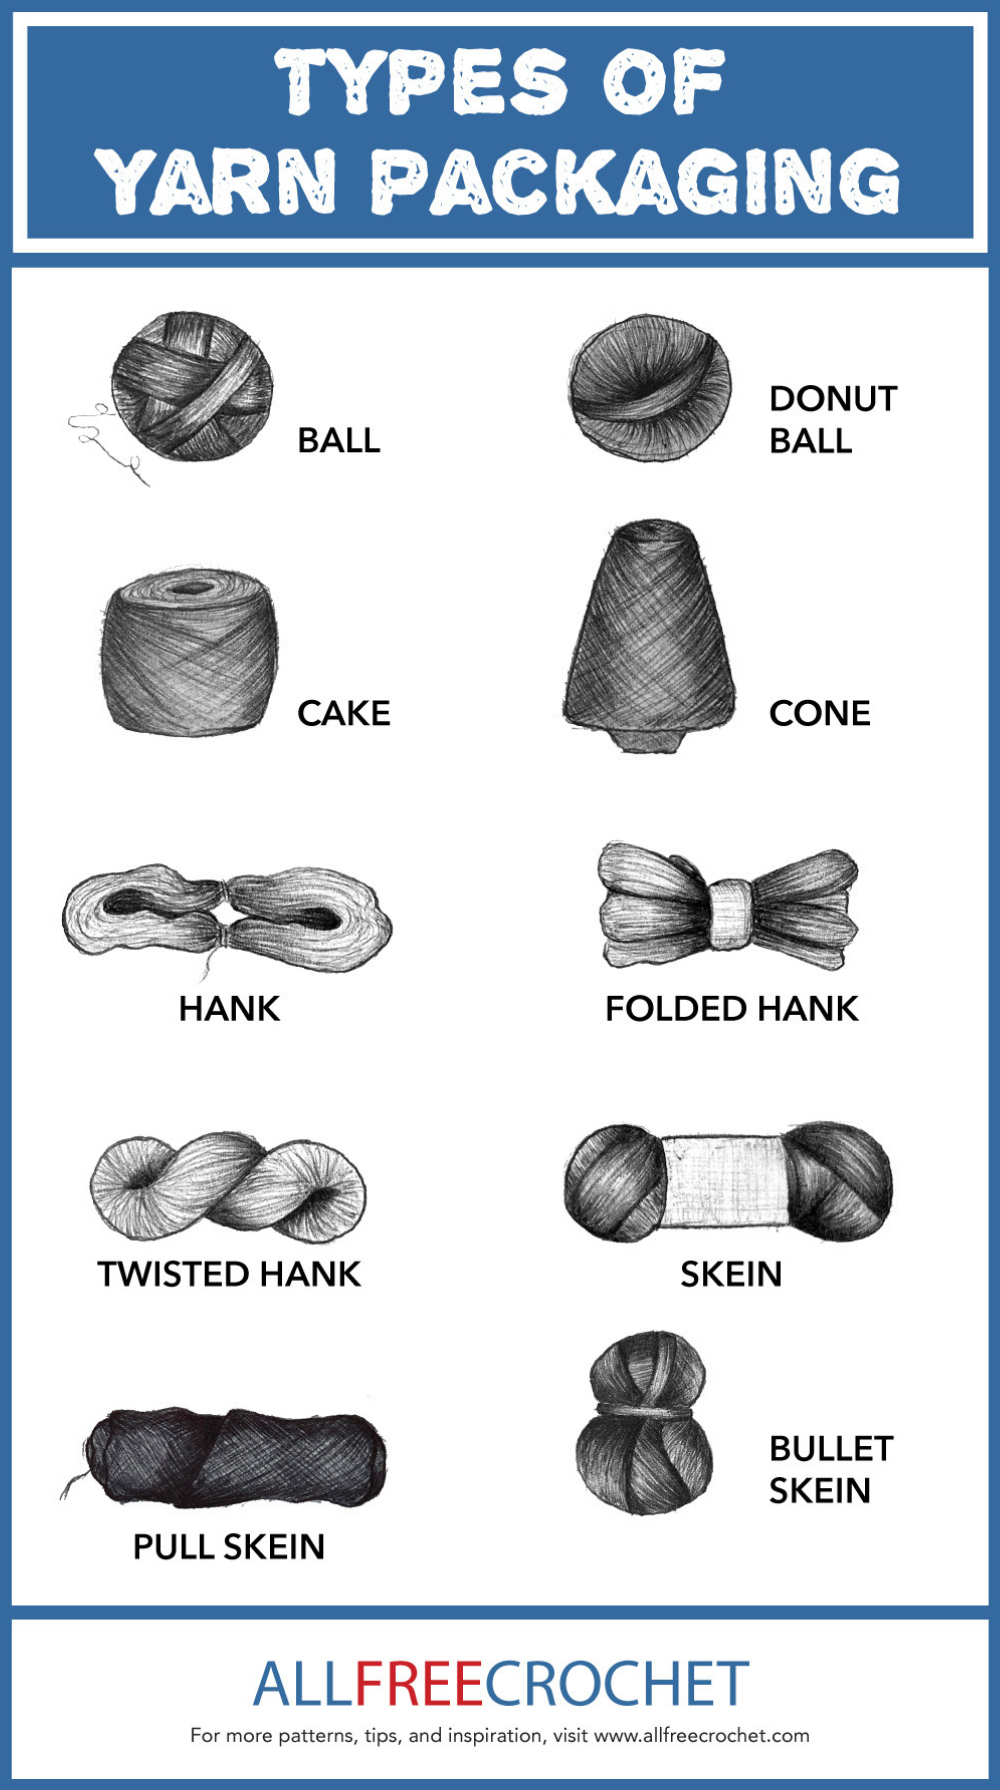 What is the Difference Between a Hank, a Skein, a Ball, and a Cake of Yarn?